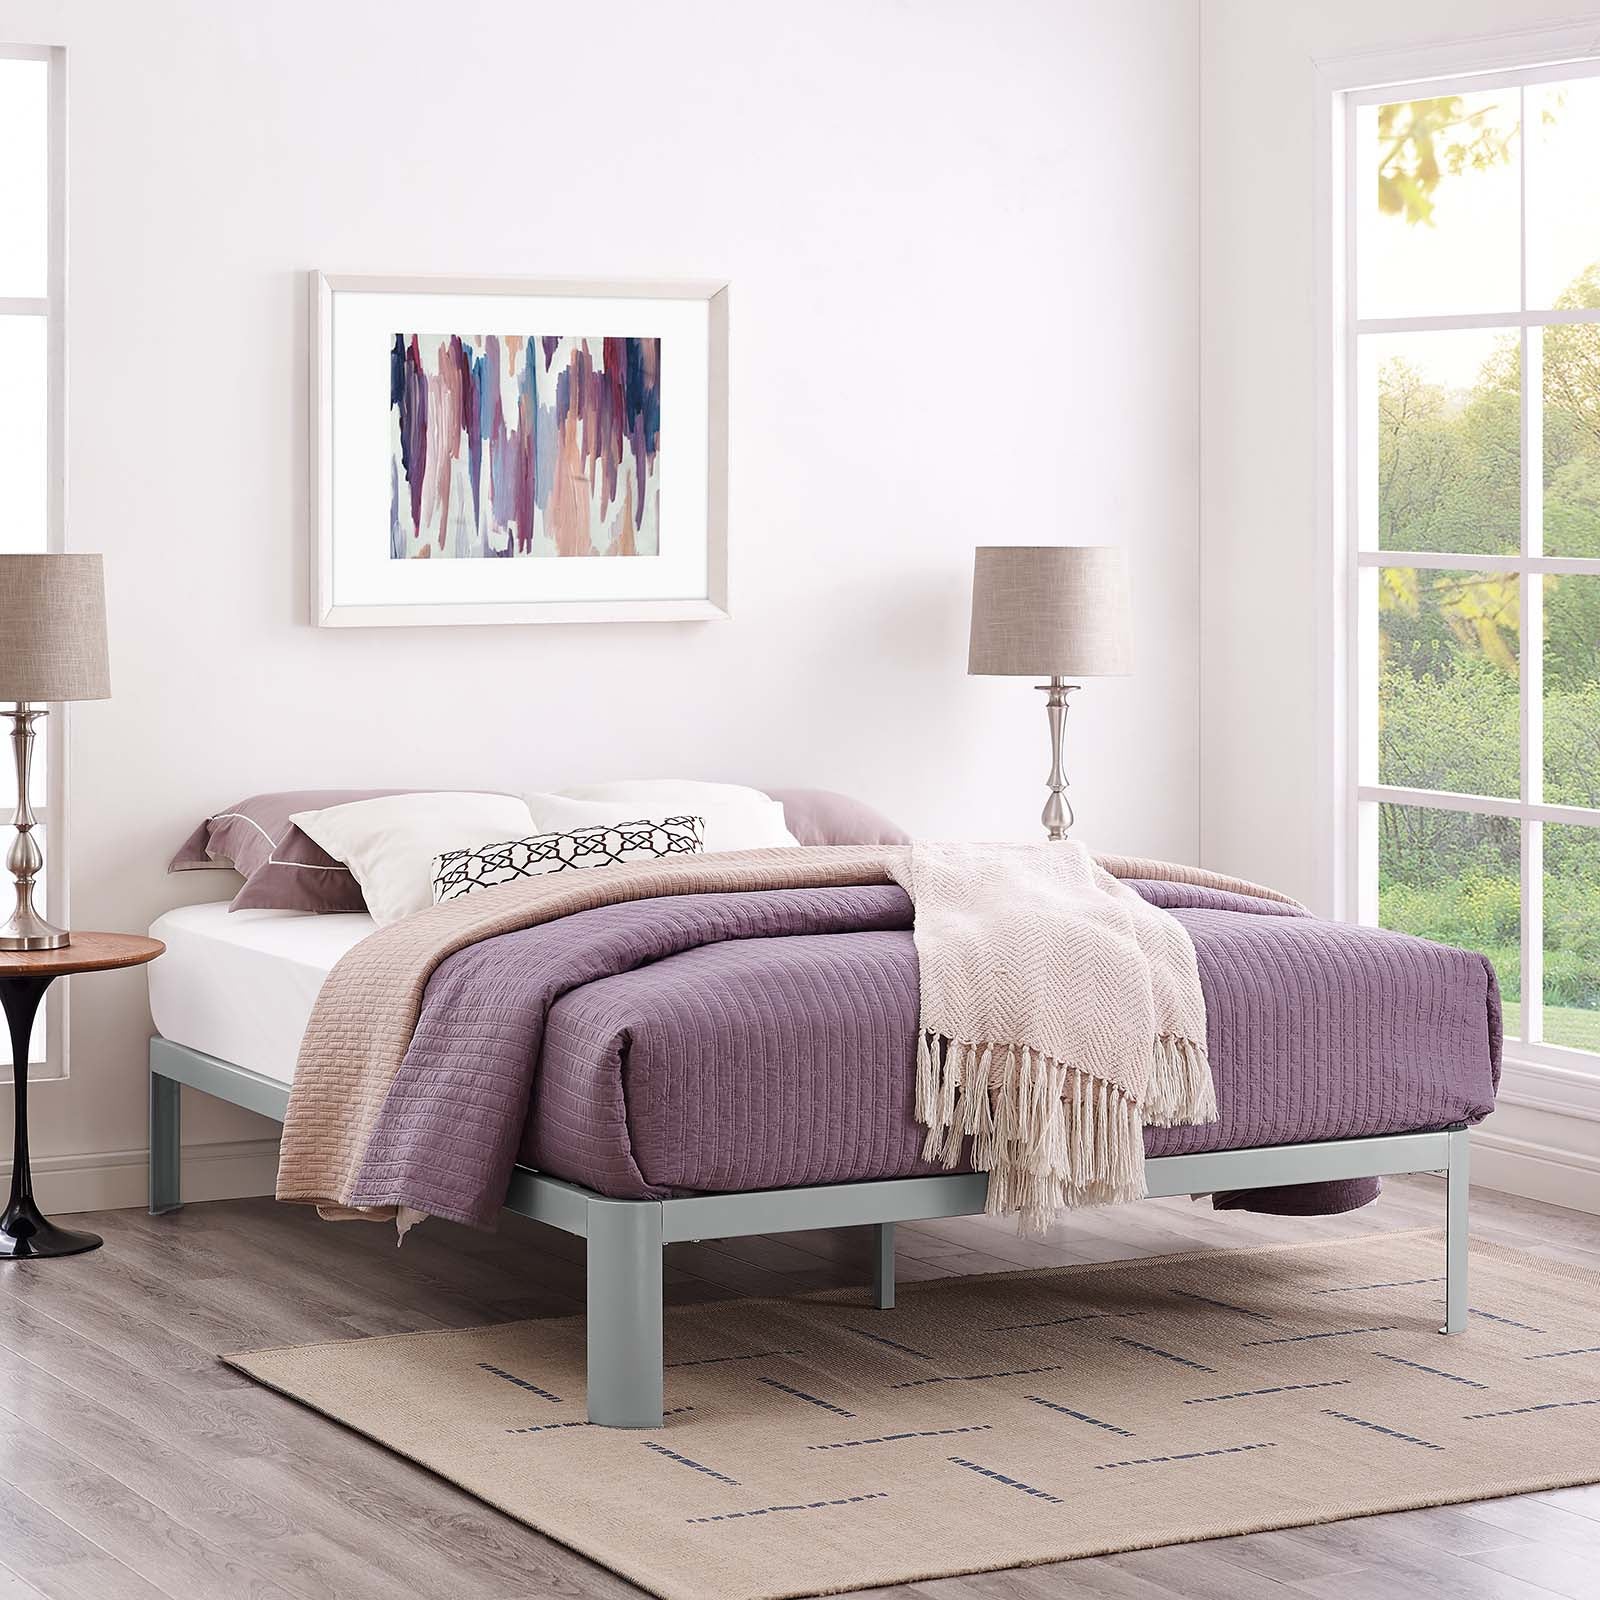 Modway Beds - Corinne Full Bed Frame Gray